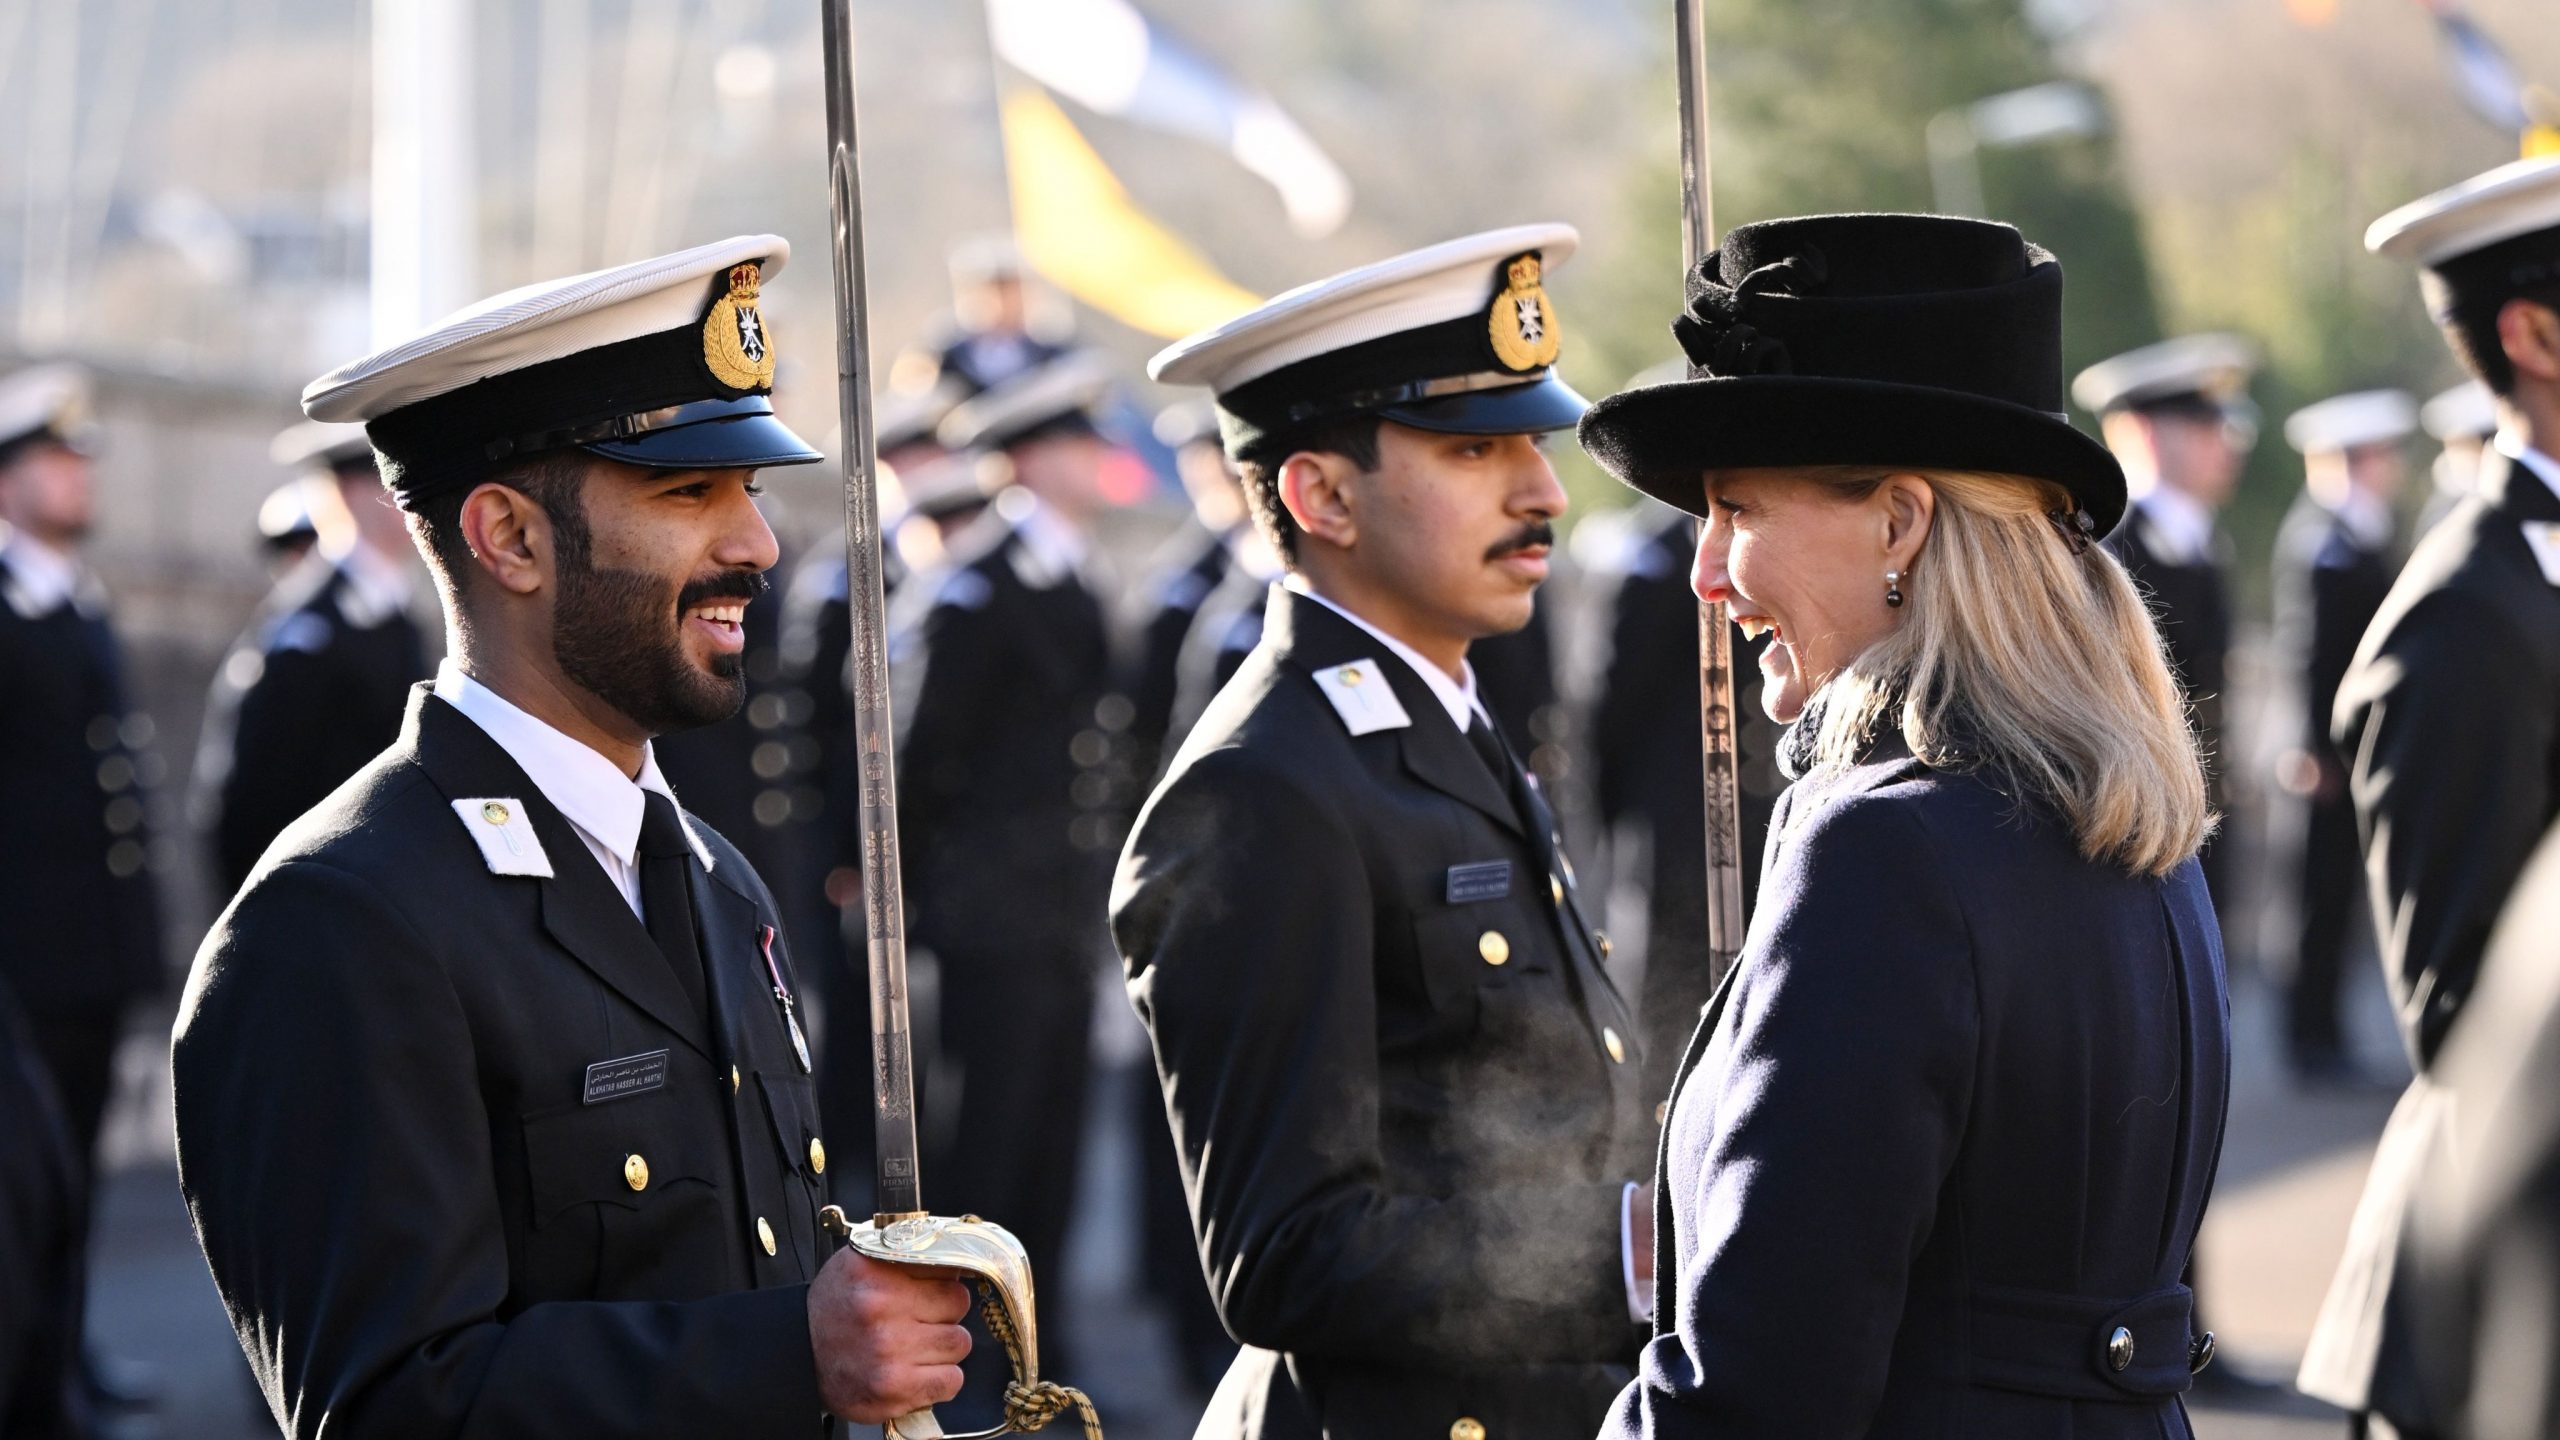 New rules say female recruits in the UK Royal Navy can have sports